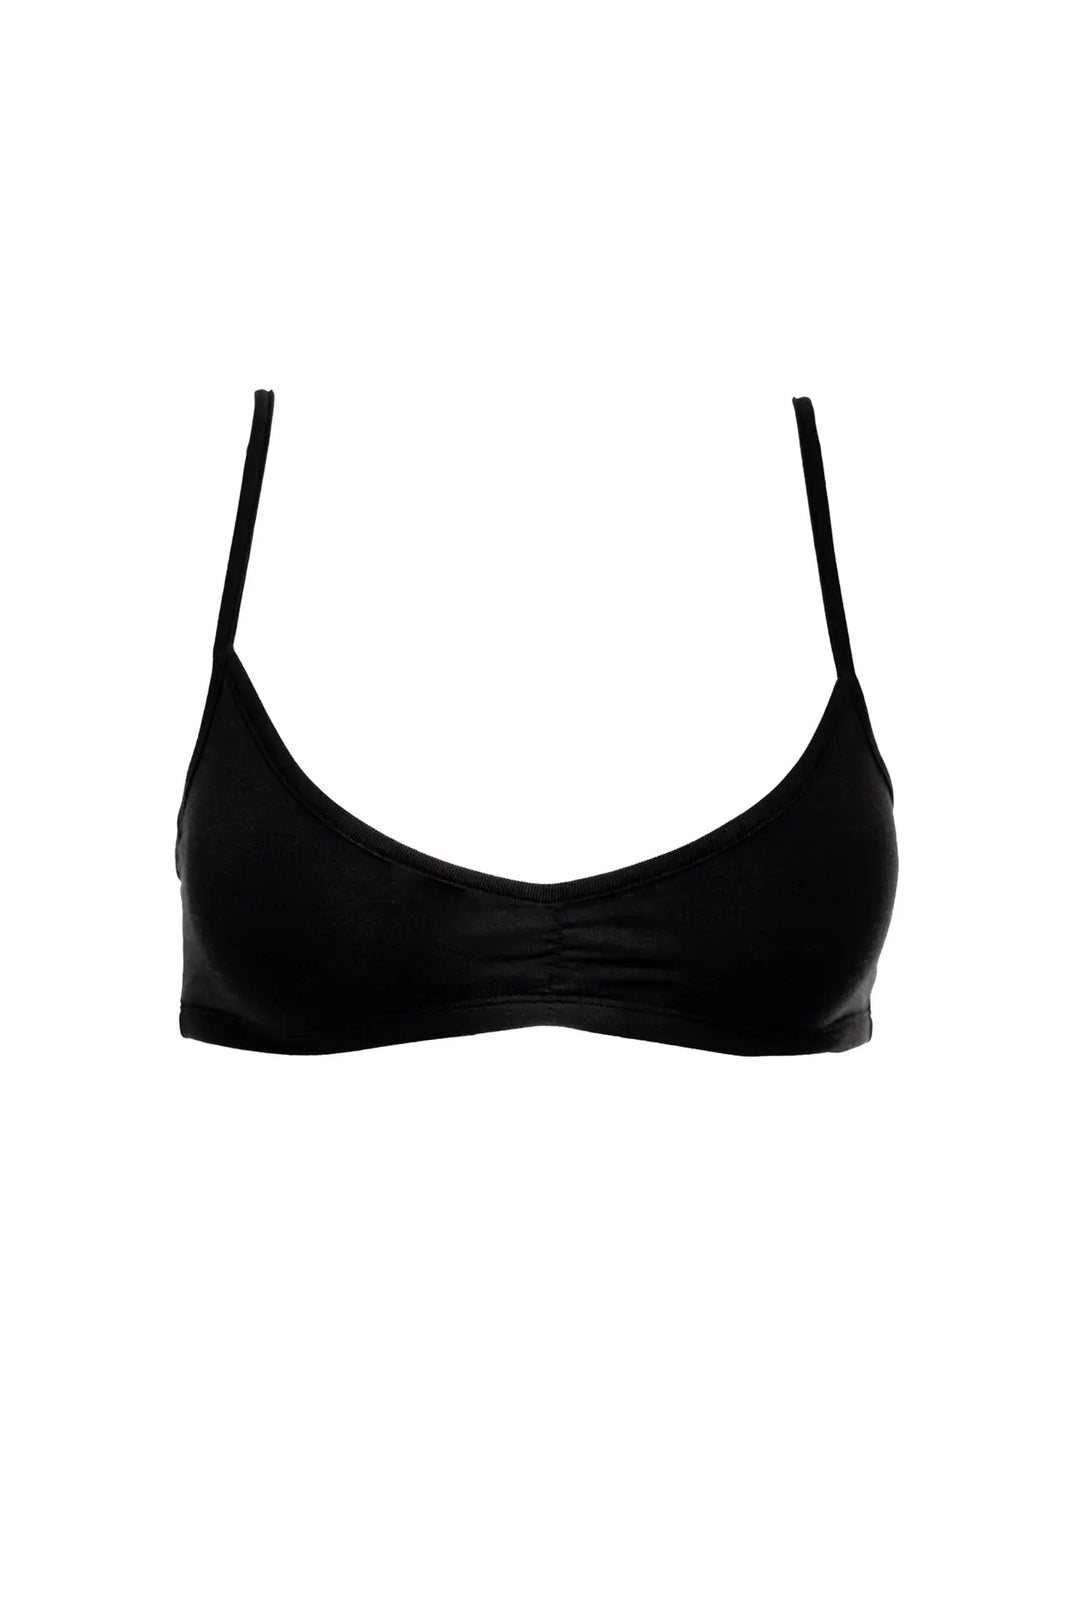 Black bralette with ruched front detail